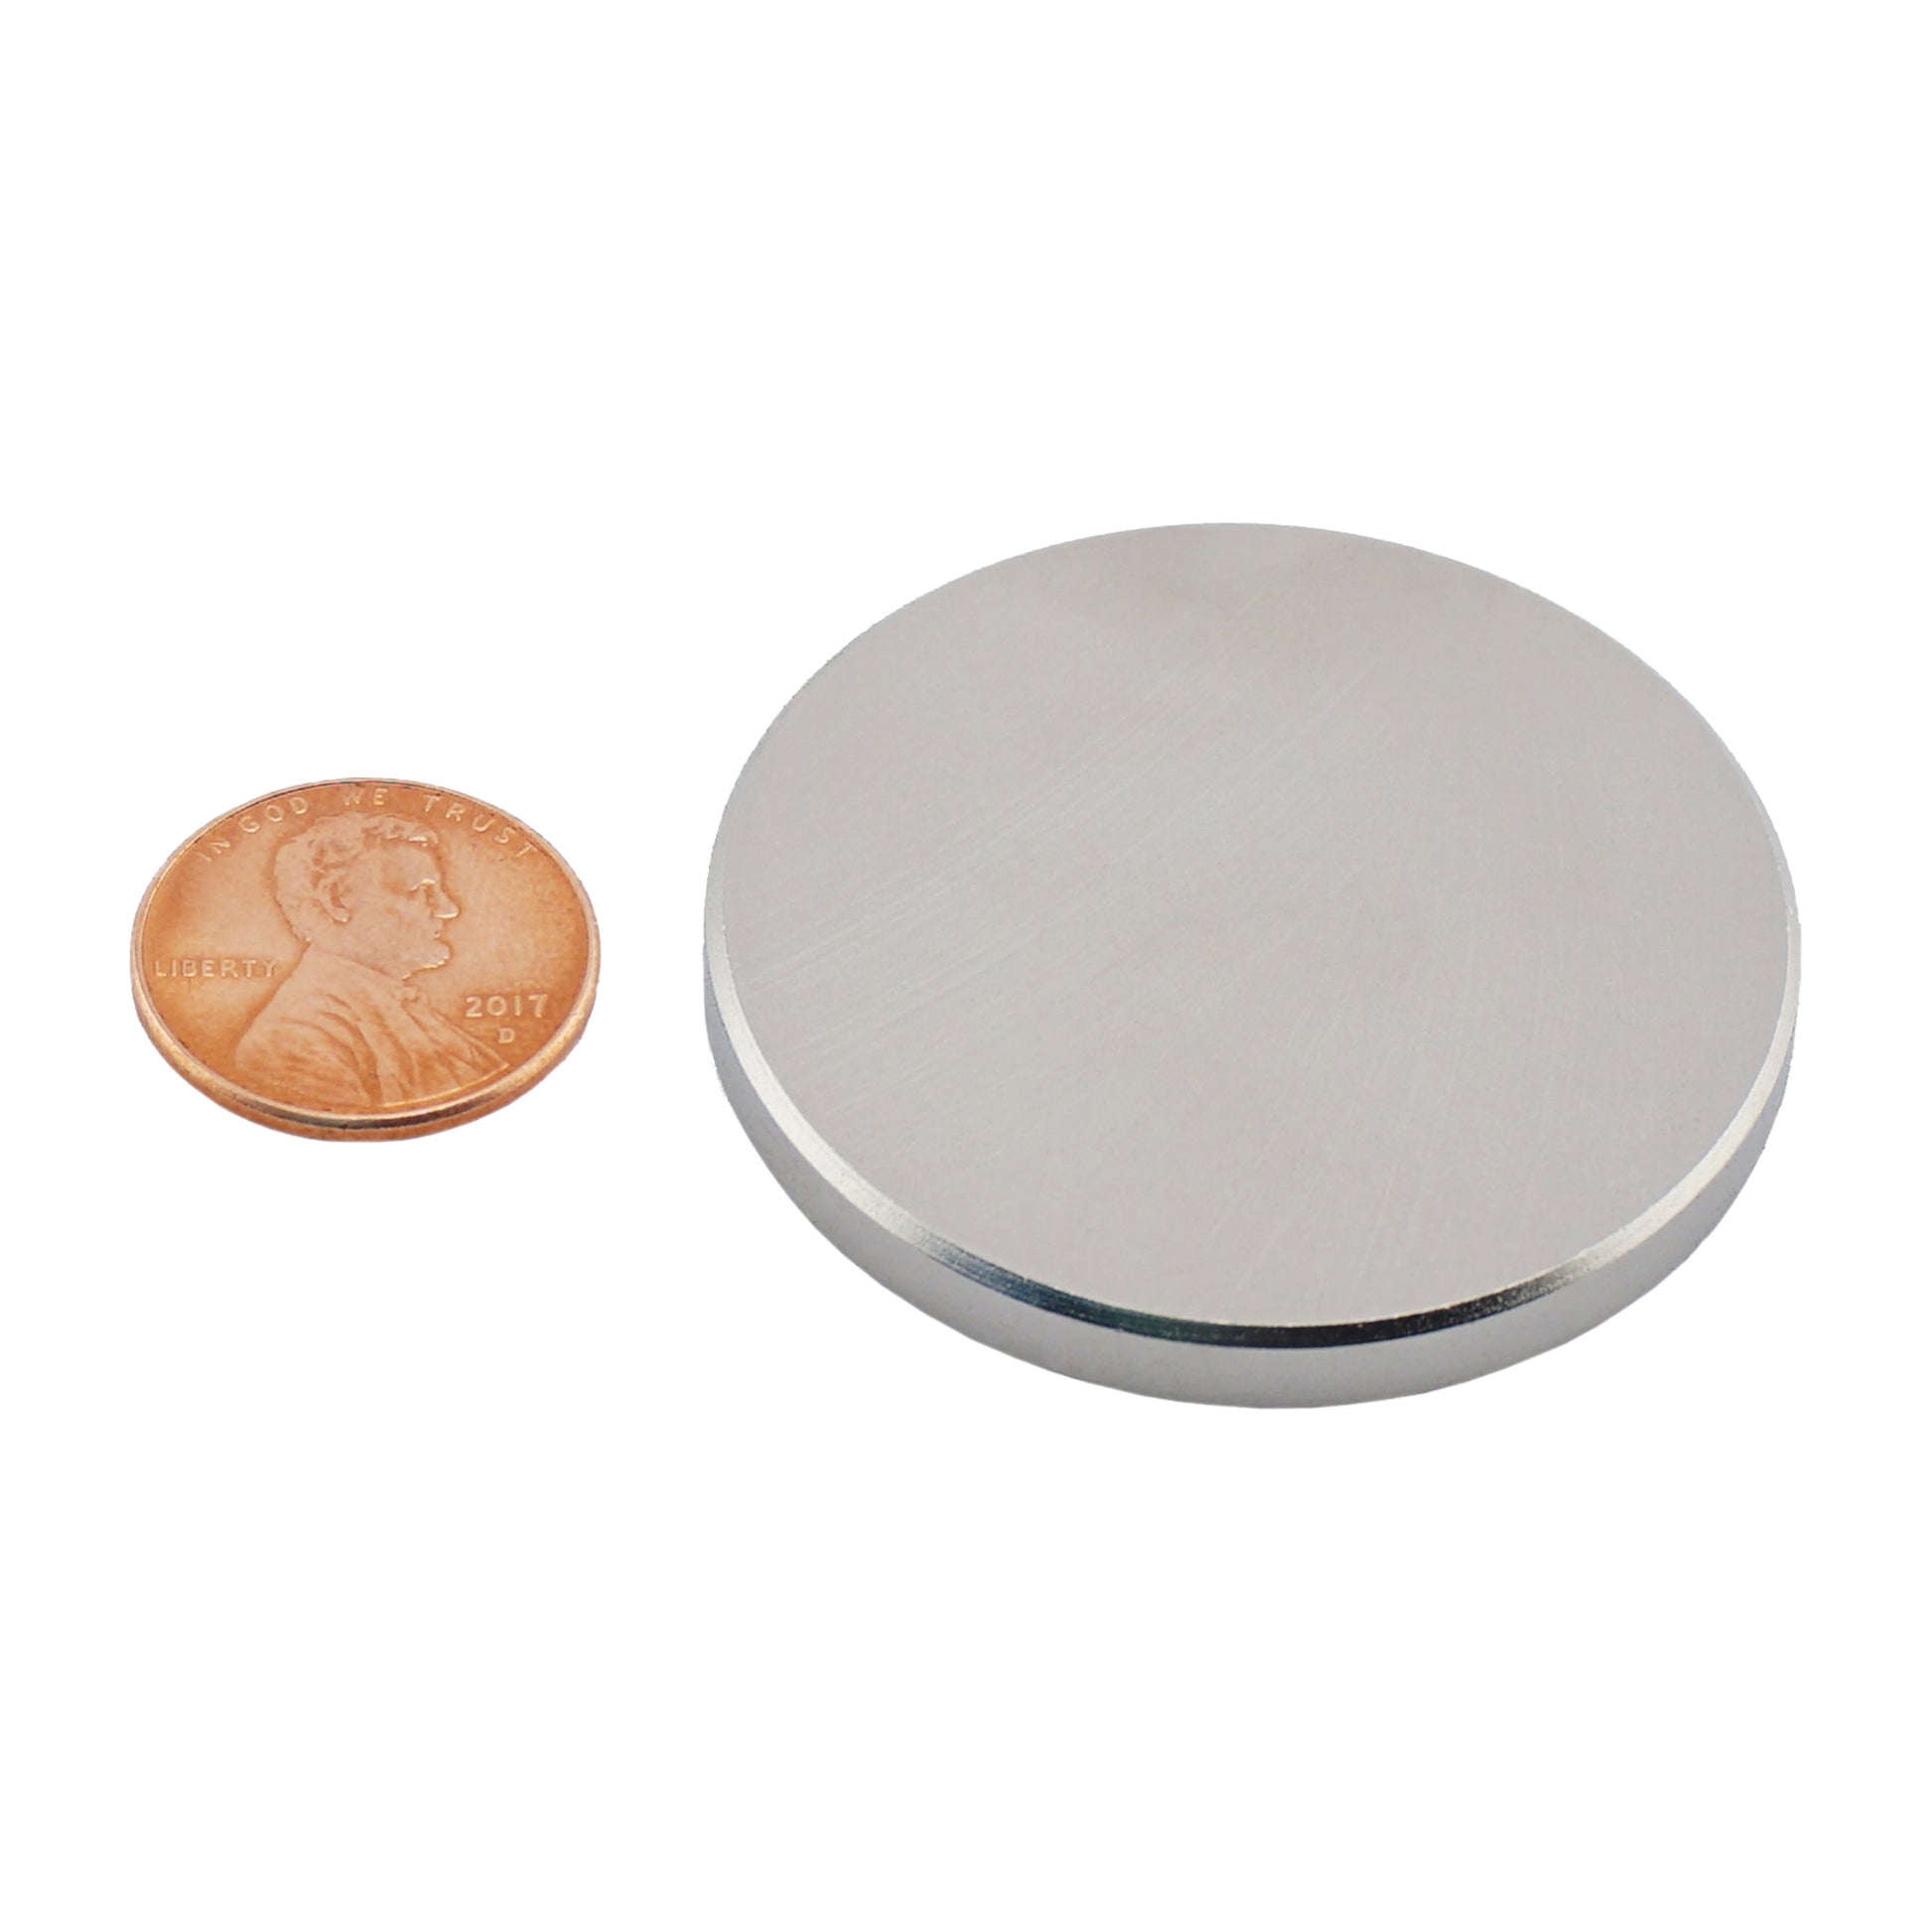 Load image into Gallery viewer, ND017501N Neodymium Disc Magnet - Compared to Penny for Size Reference